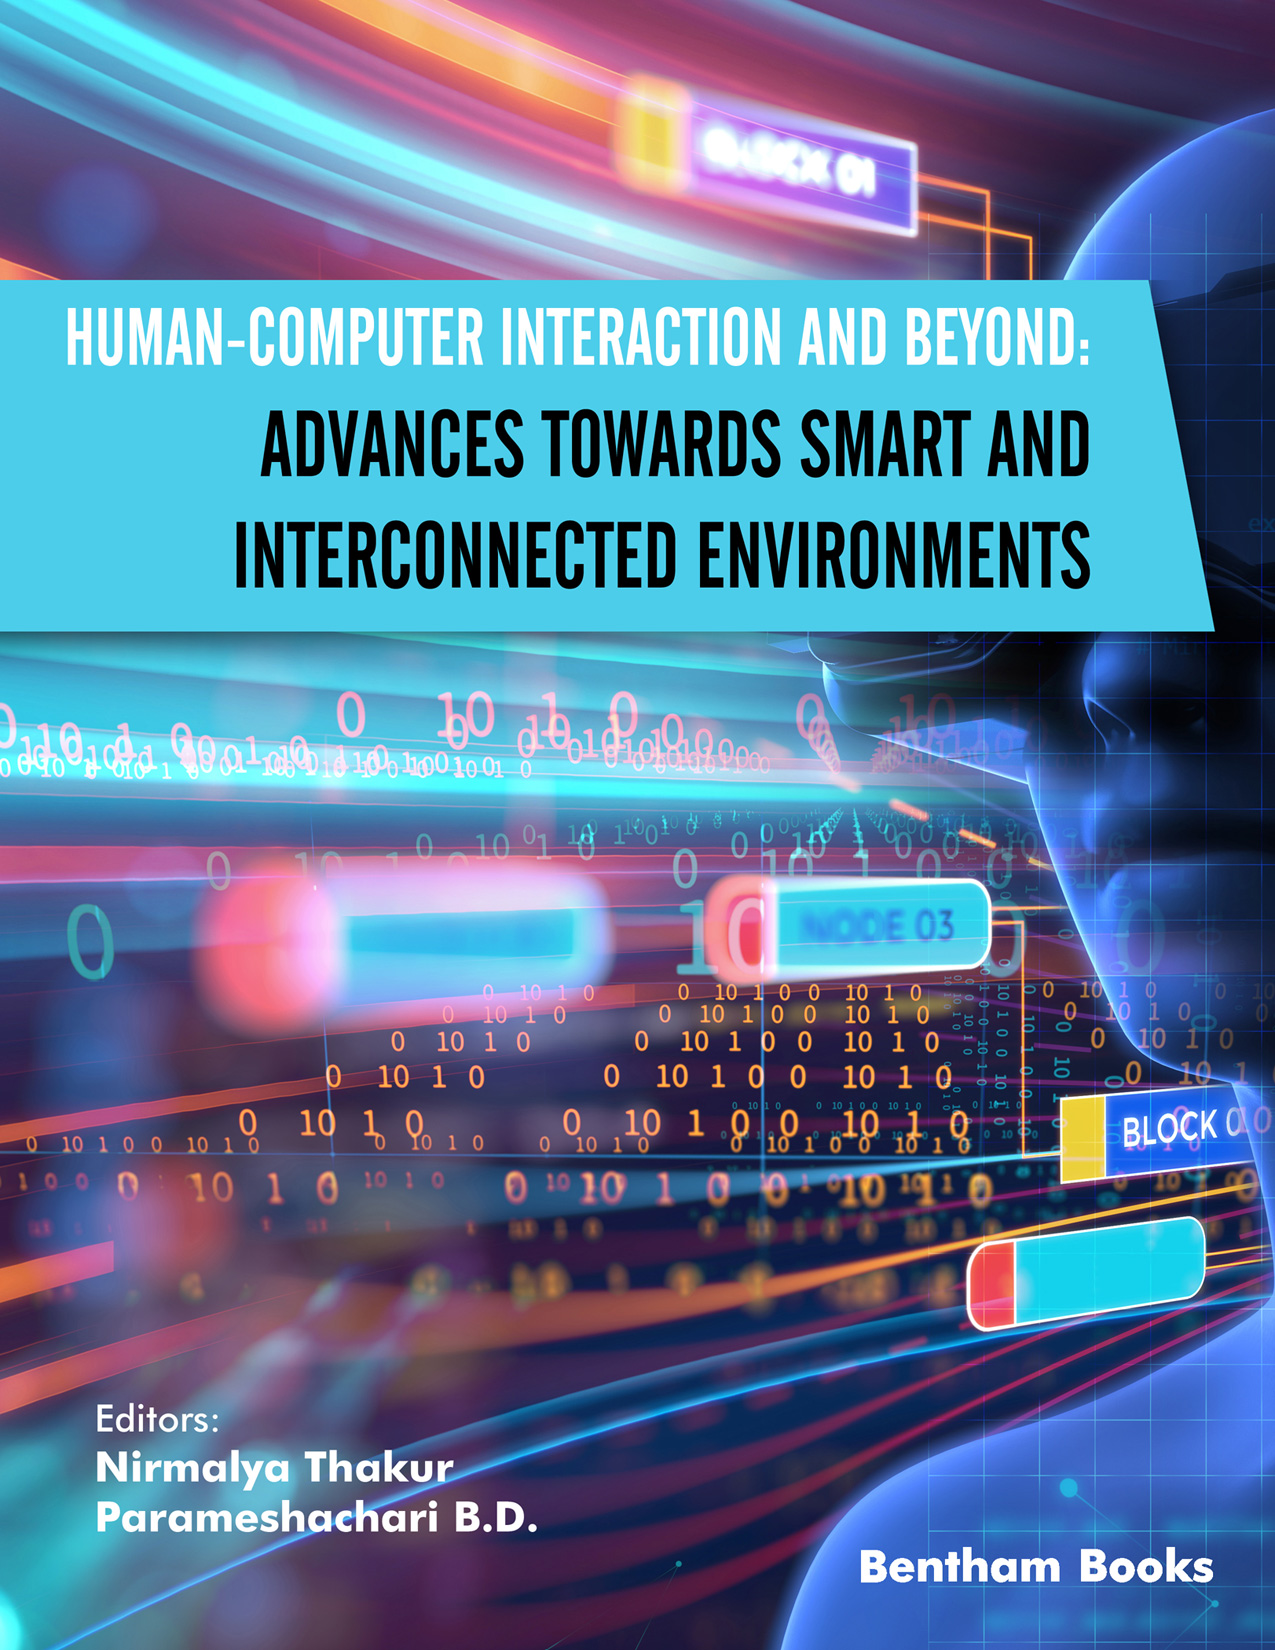 Human-Computer Interaction and Beyond: Advances Towards Smart and Interconnected Environments
(Part 1)